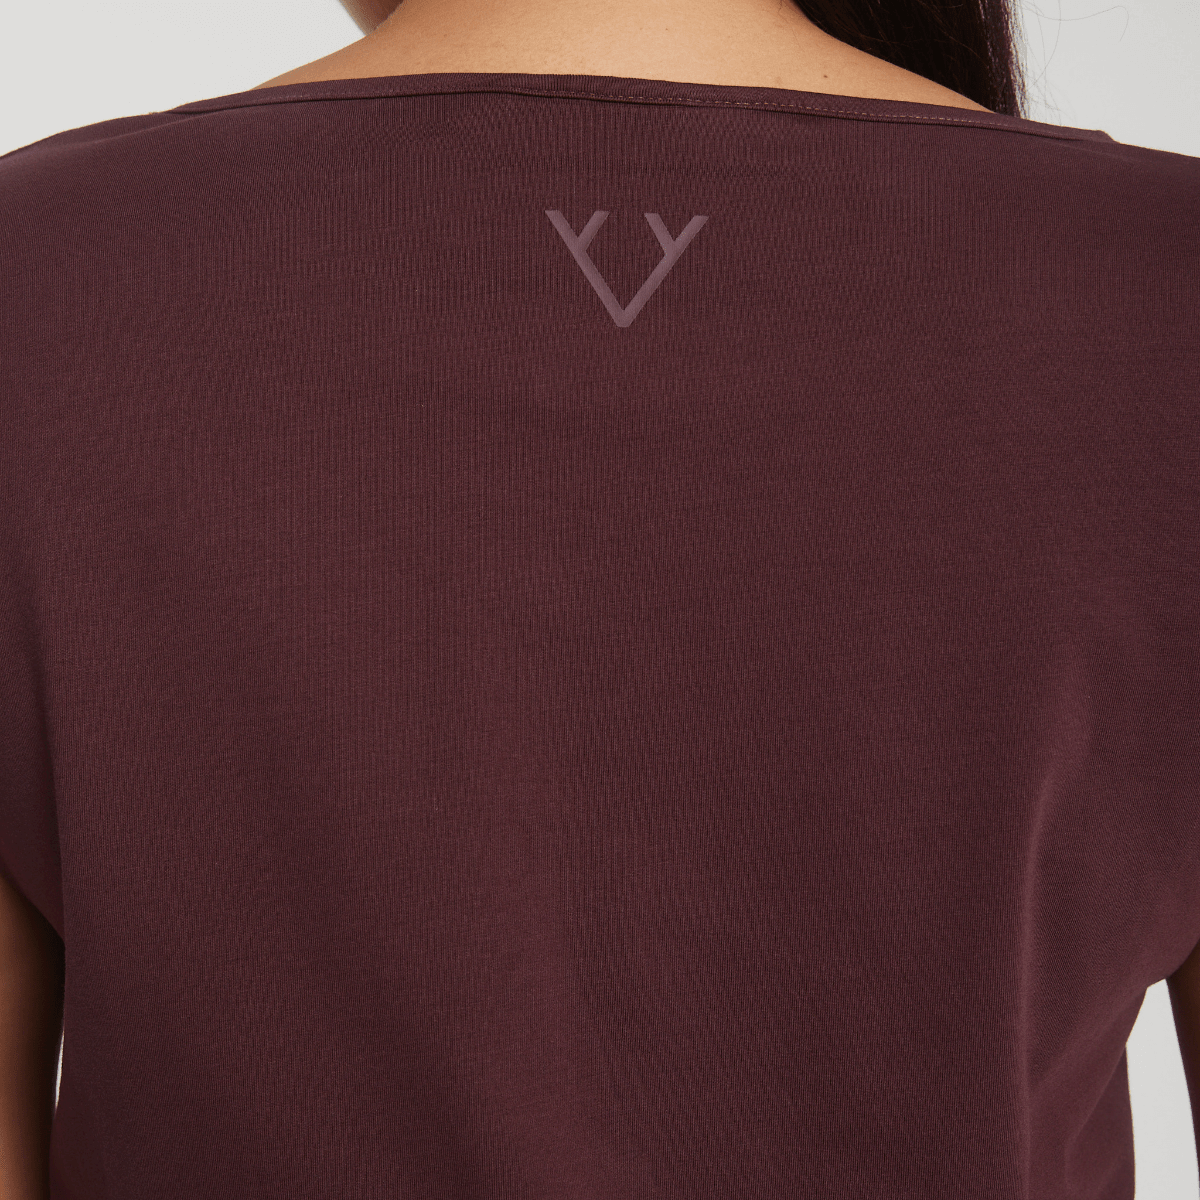 Victoria Stag's Core Cap Sleeved Tee in Ox Blood back